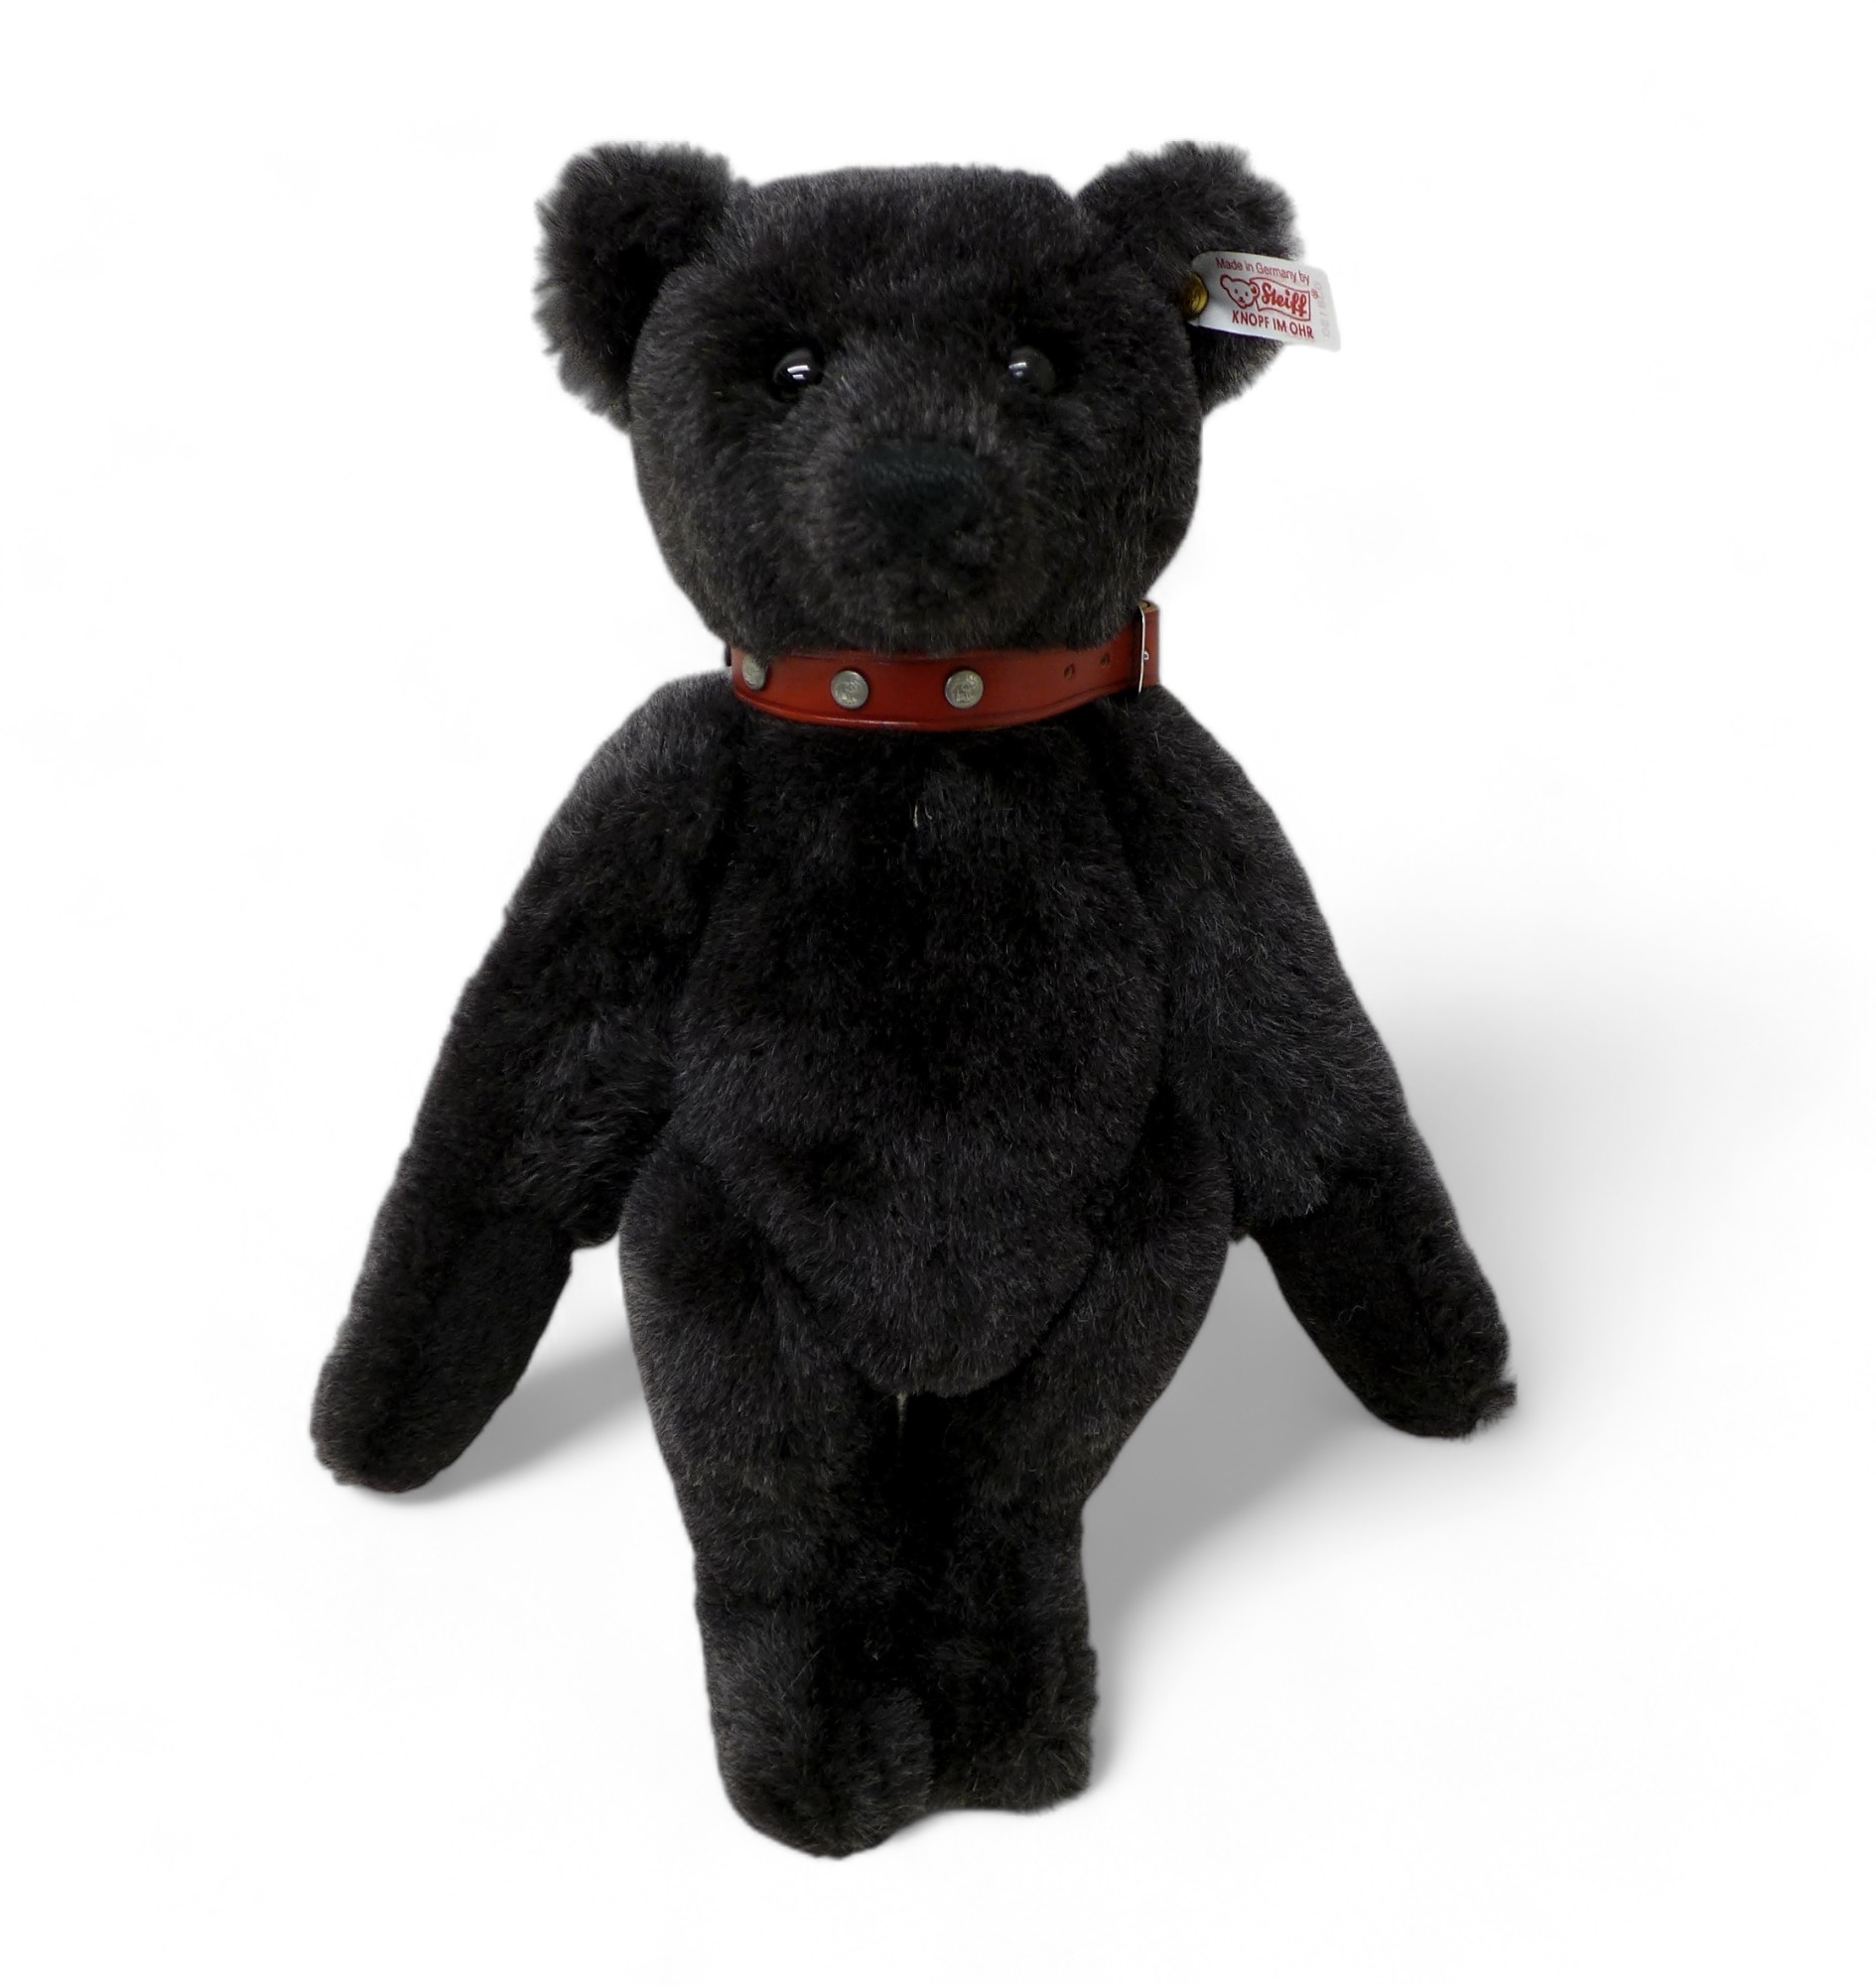 Steiff Teddy Bear Black Bear with red studded collar, Black mohair, poseable five jointed bear, - Image 2 of 13